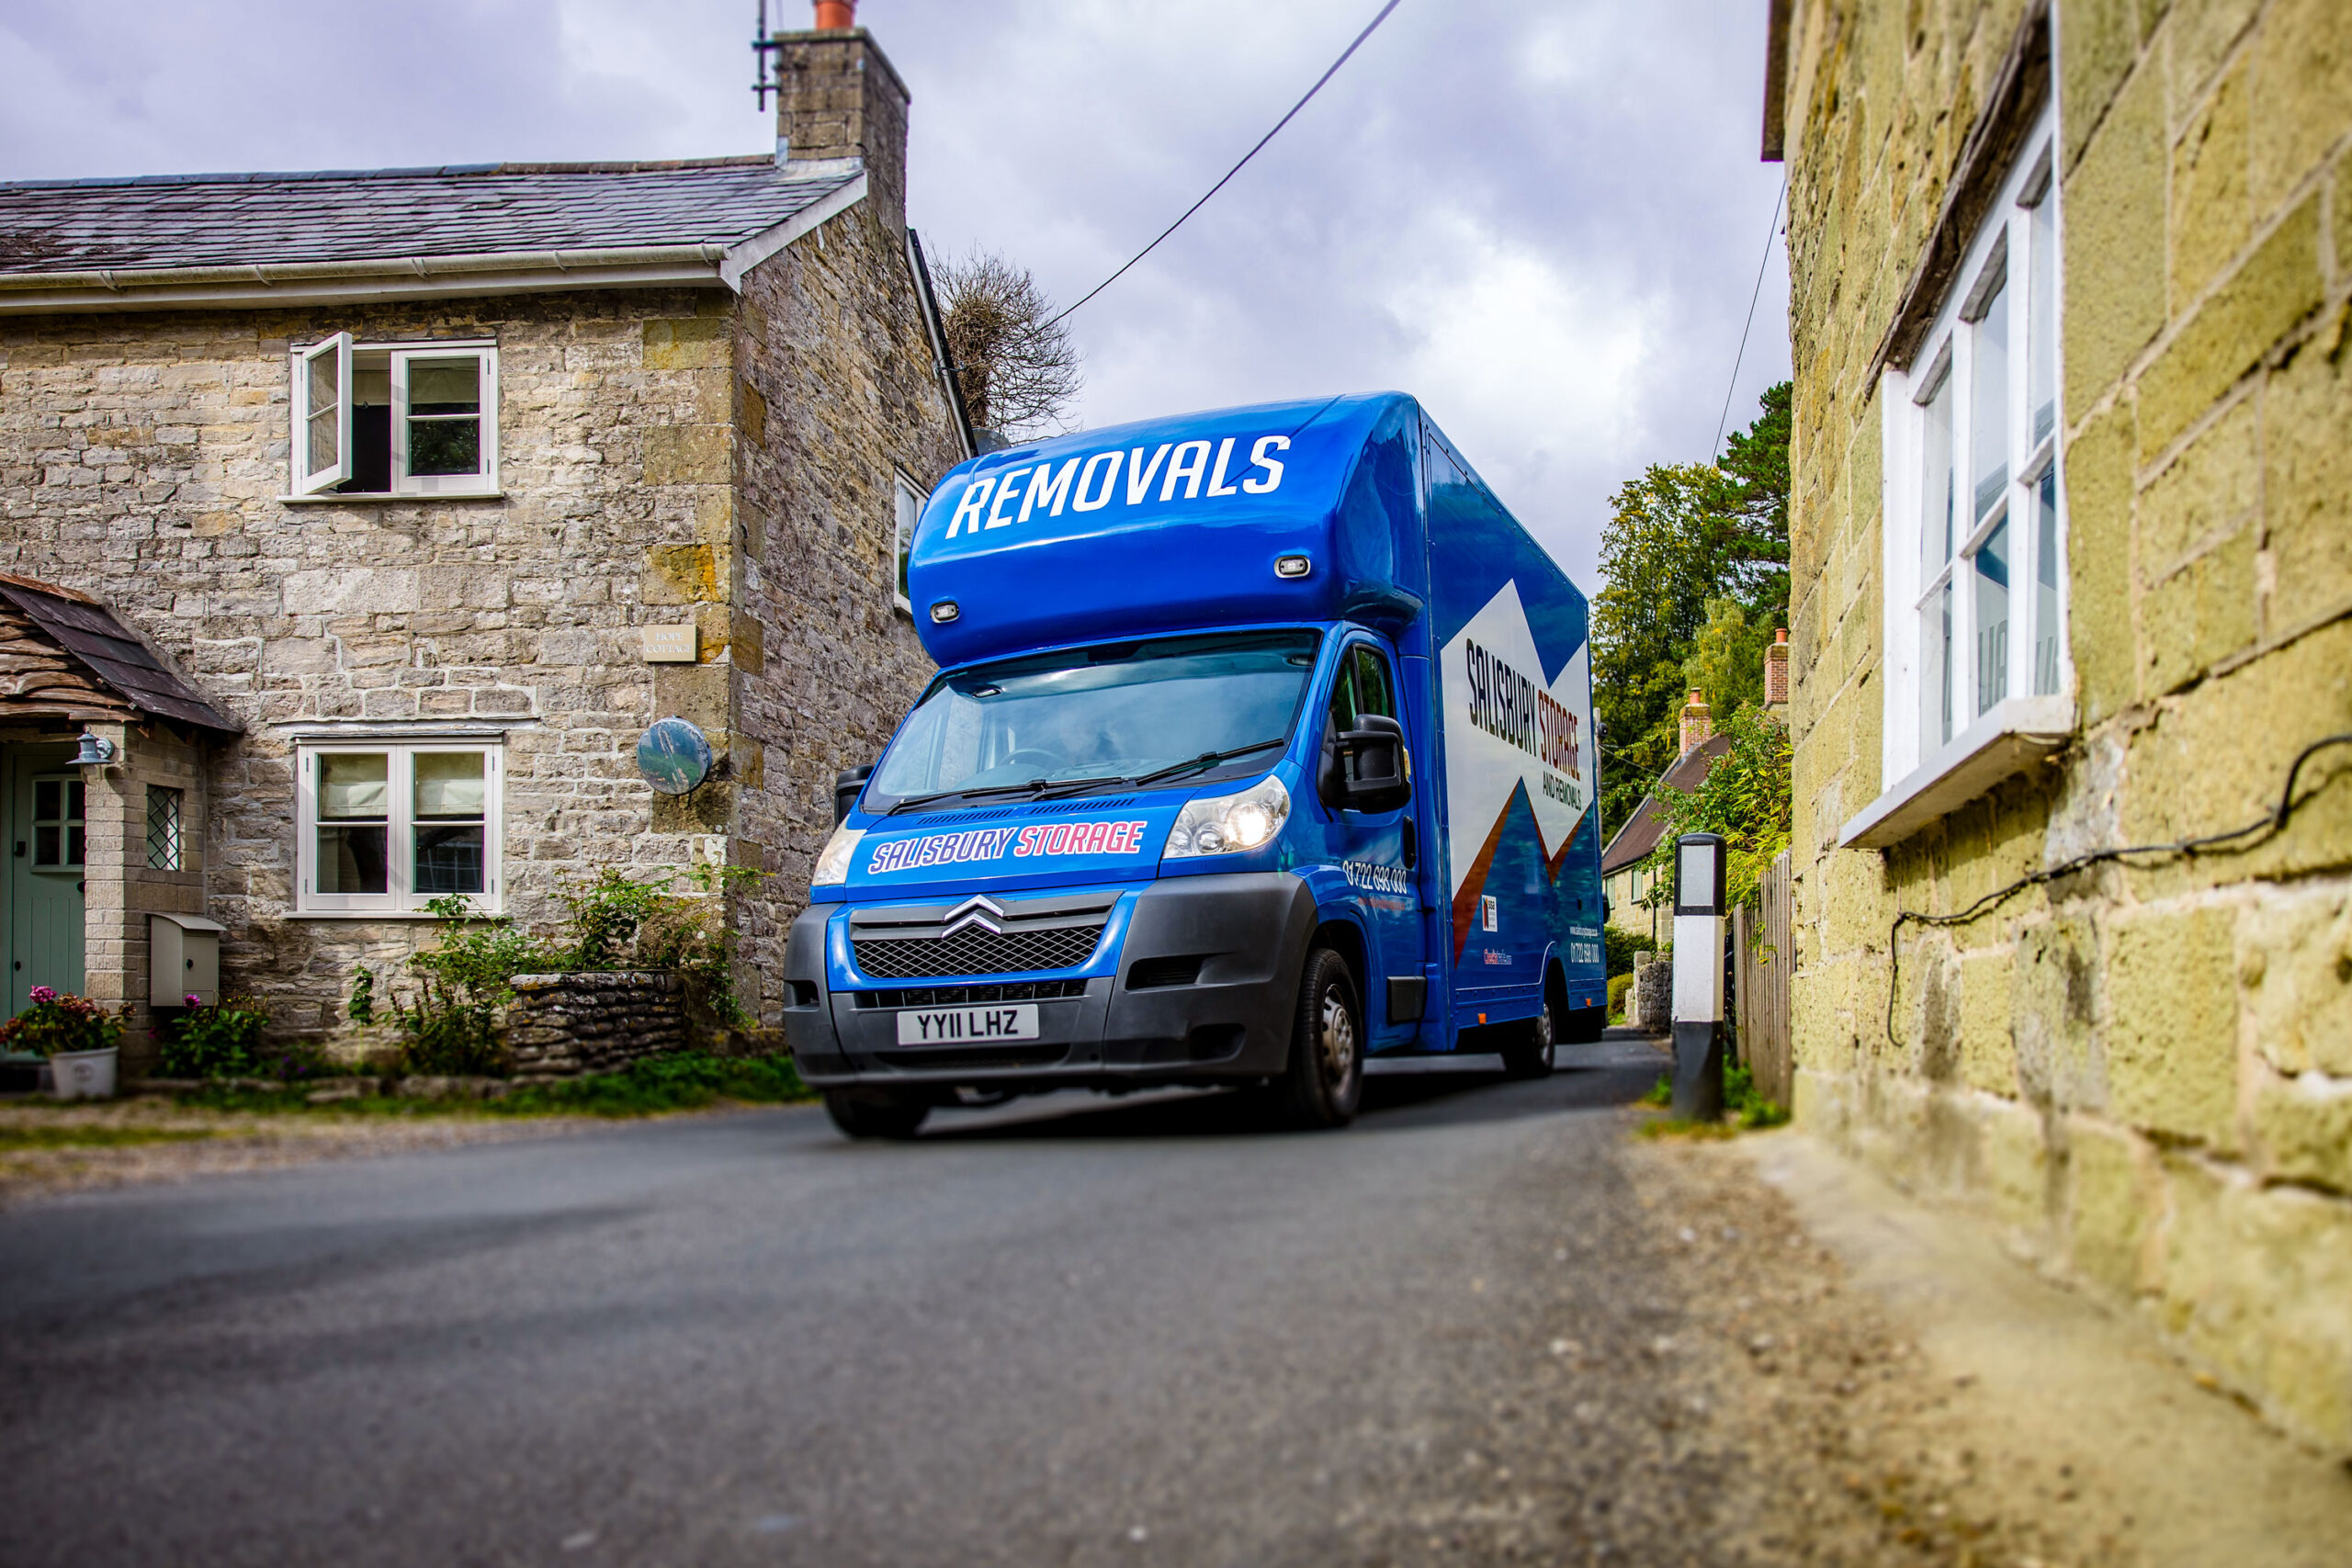 A blue removals van driving down a winding village road, surrounded by greenery and buildings.